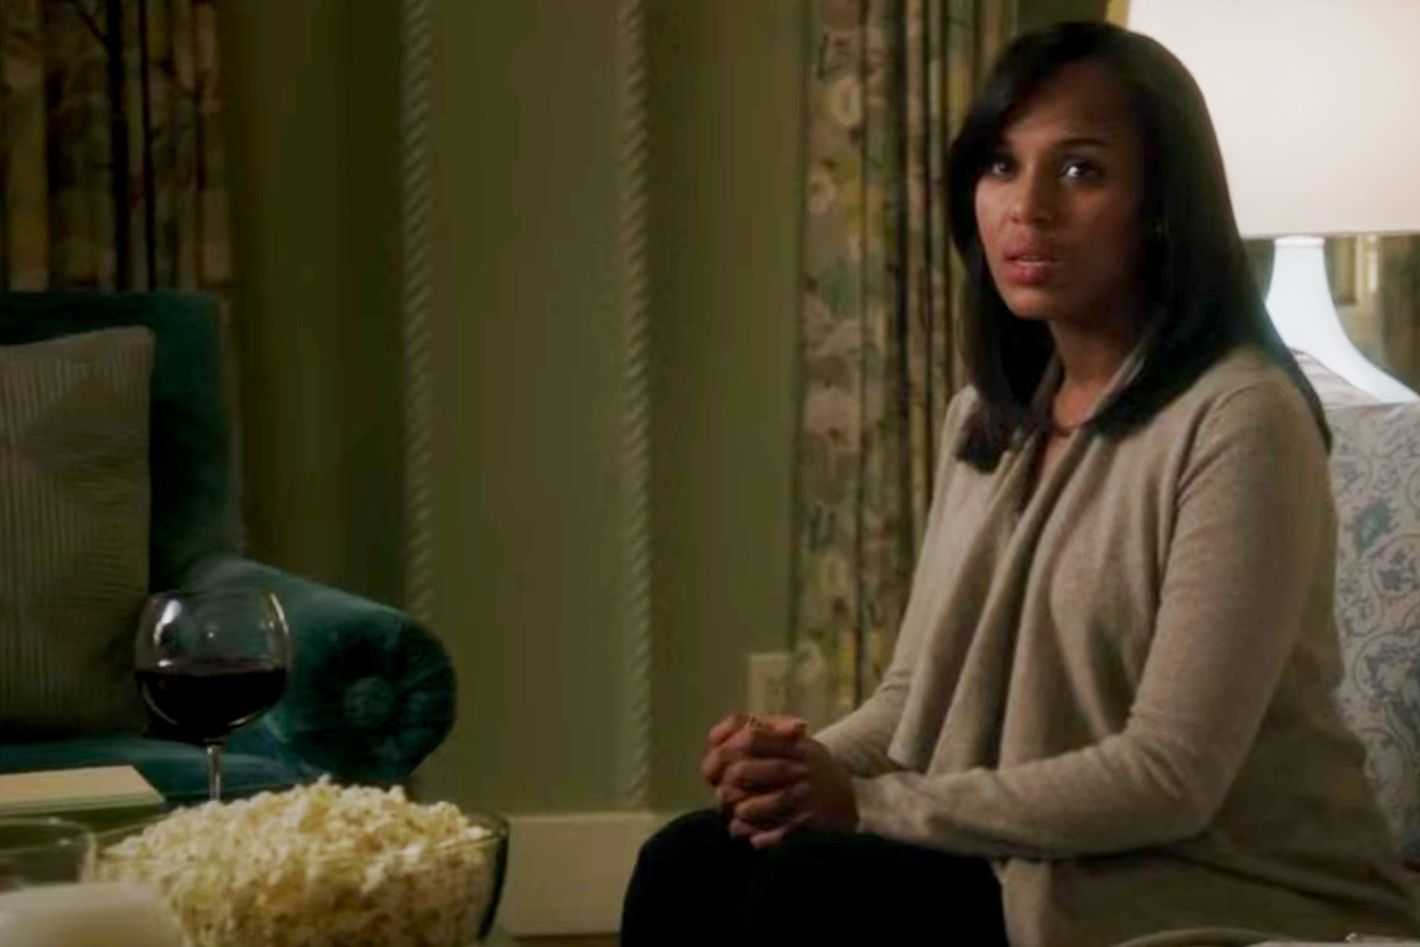 10 Olivia Pope Wine Glasses the 'Scandal' Star Would Approve – The